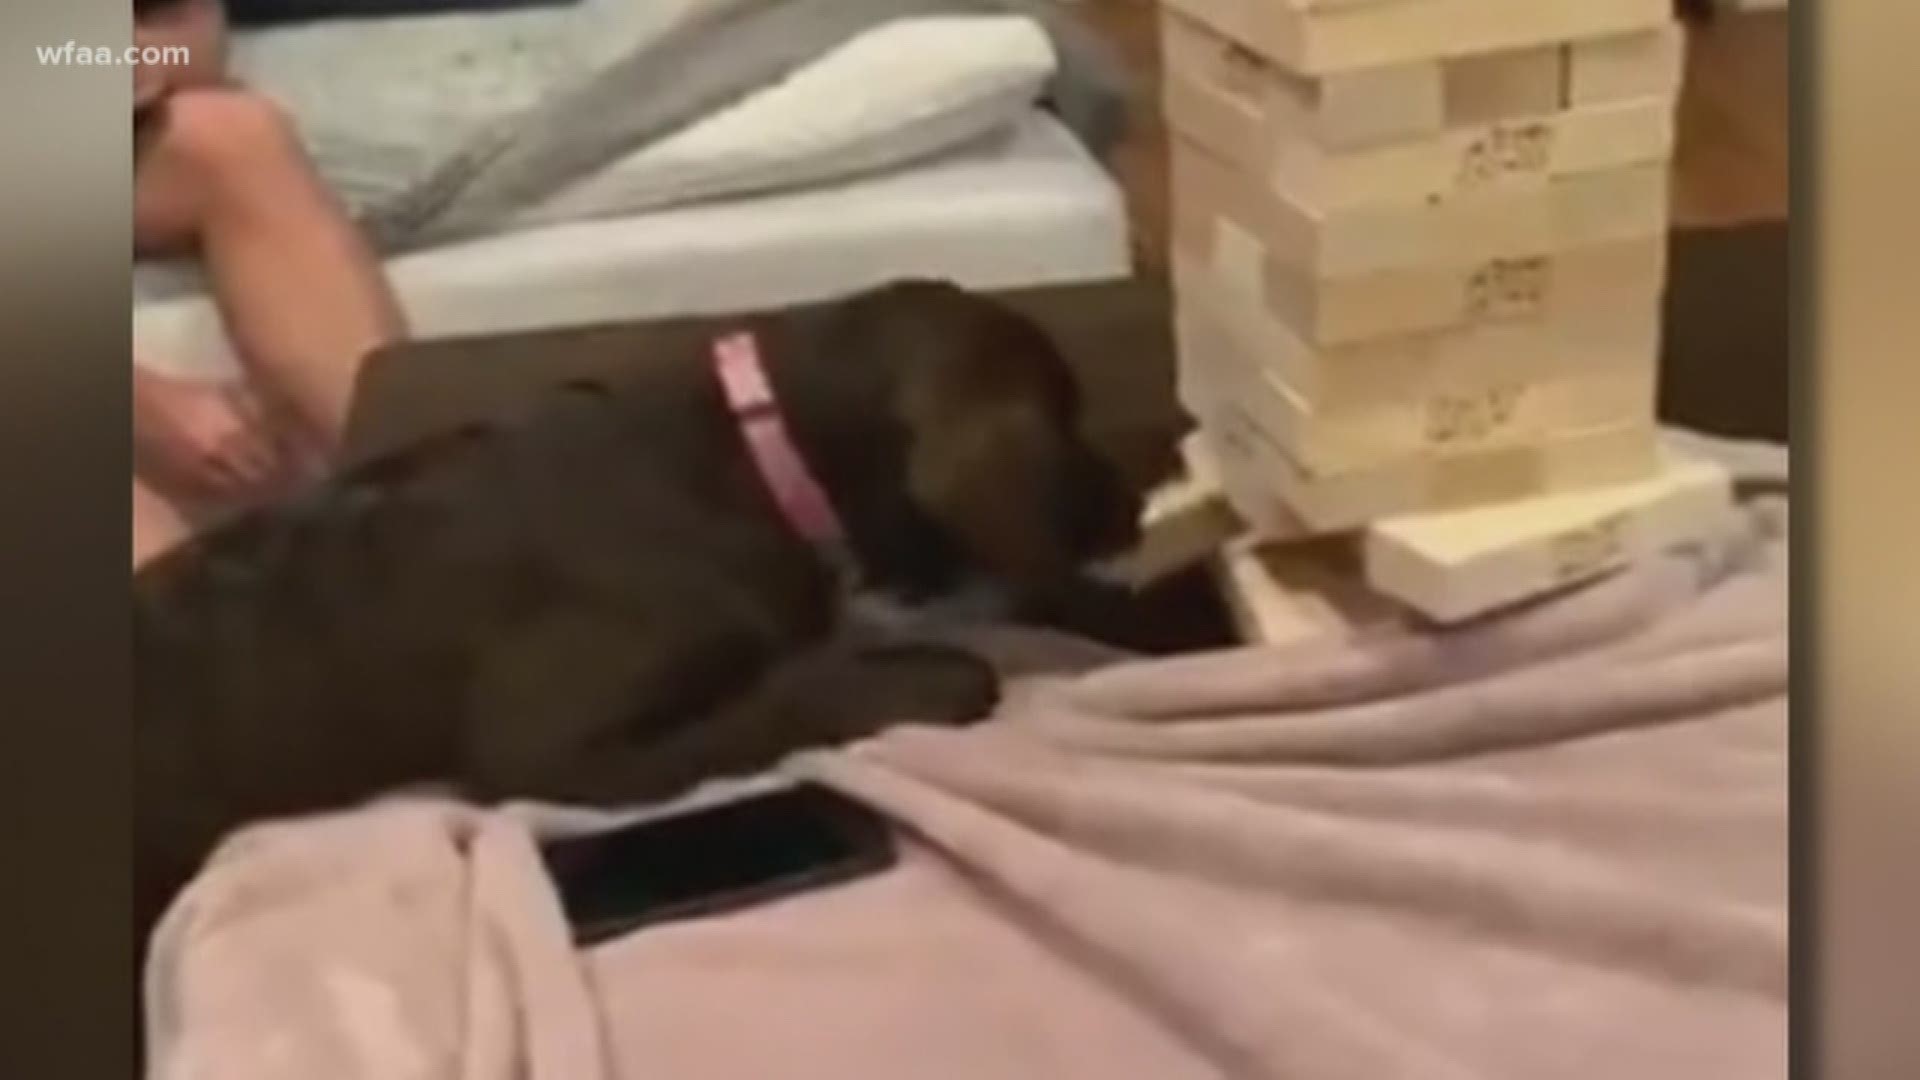 A Jenga legend was born when video captured Remy the dog dominate at the game.